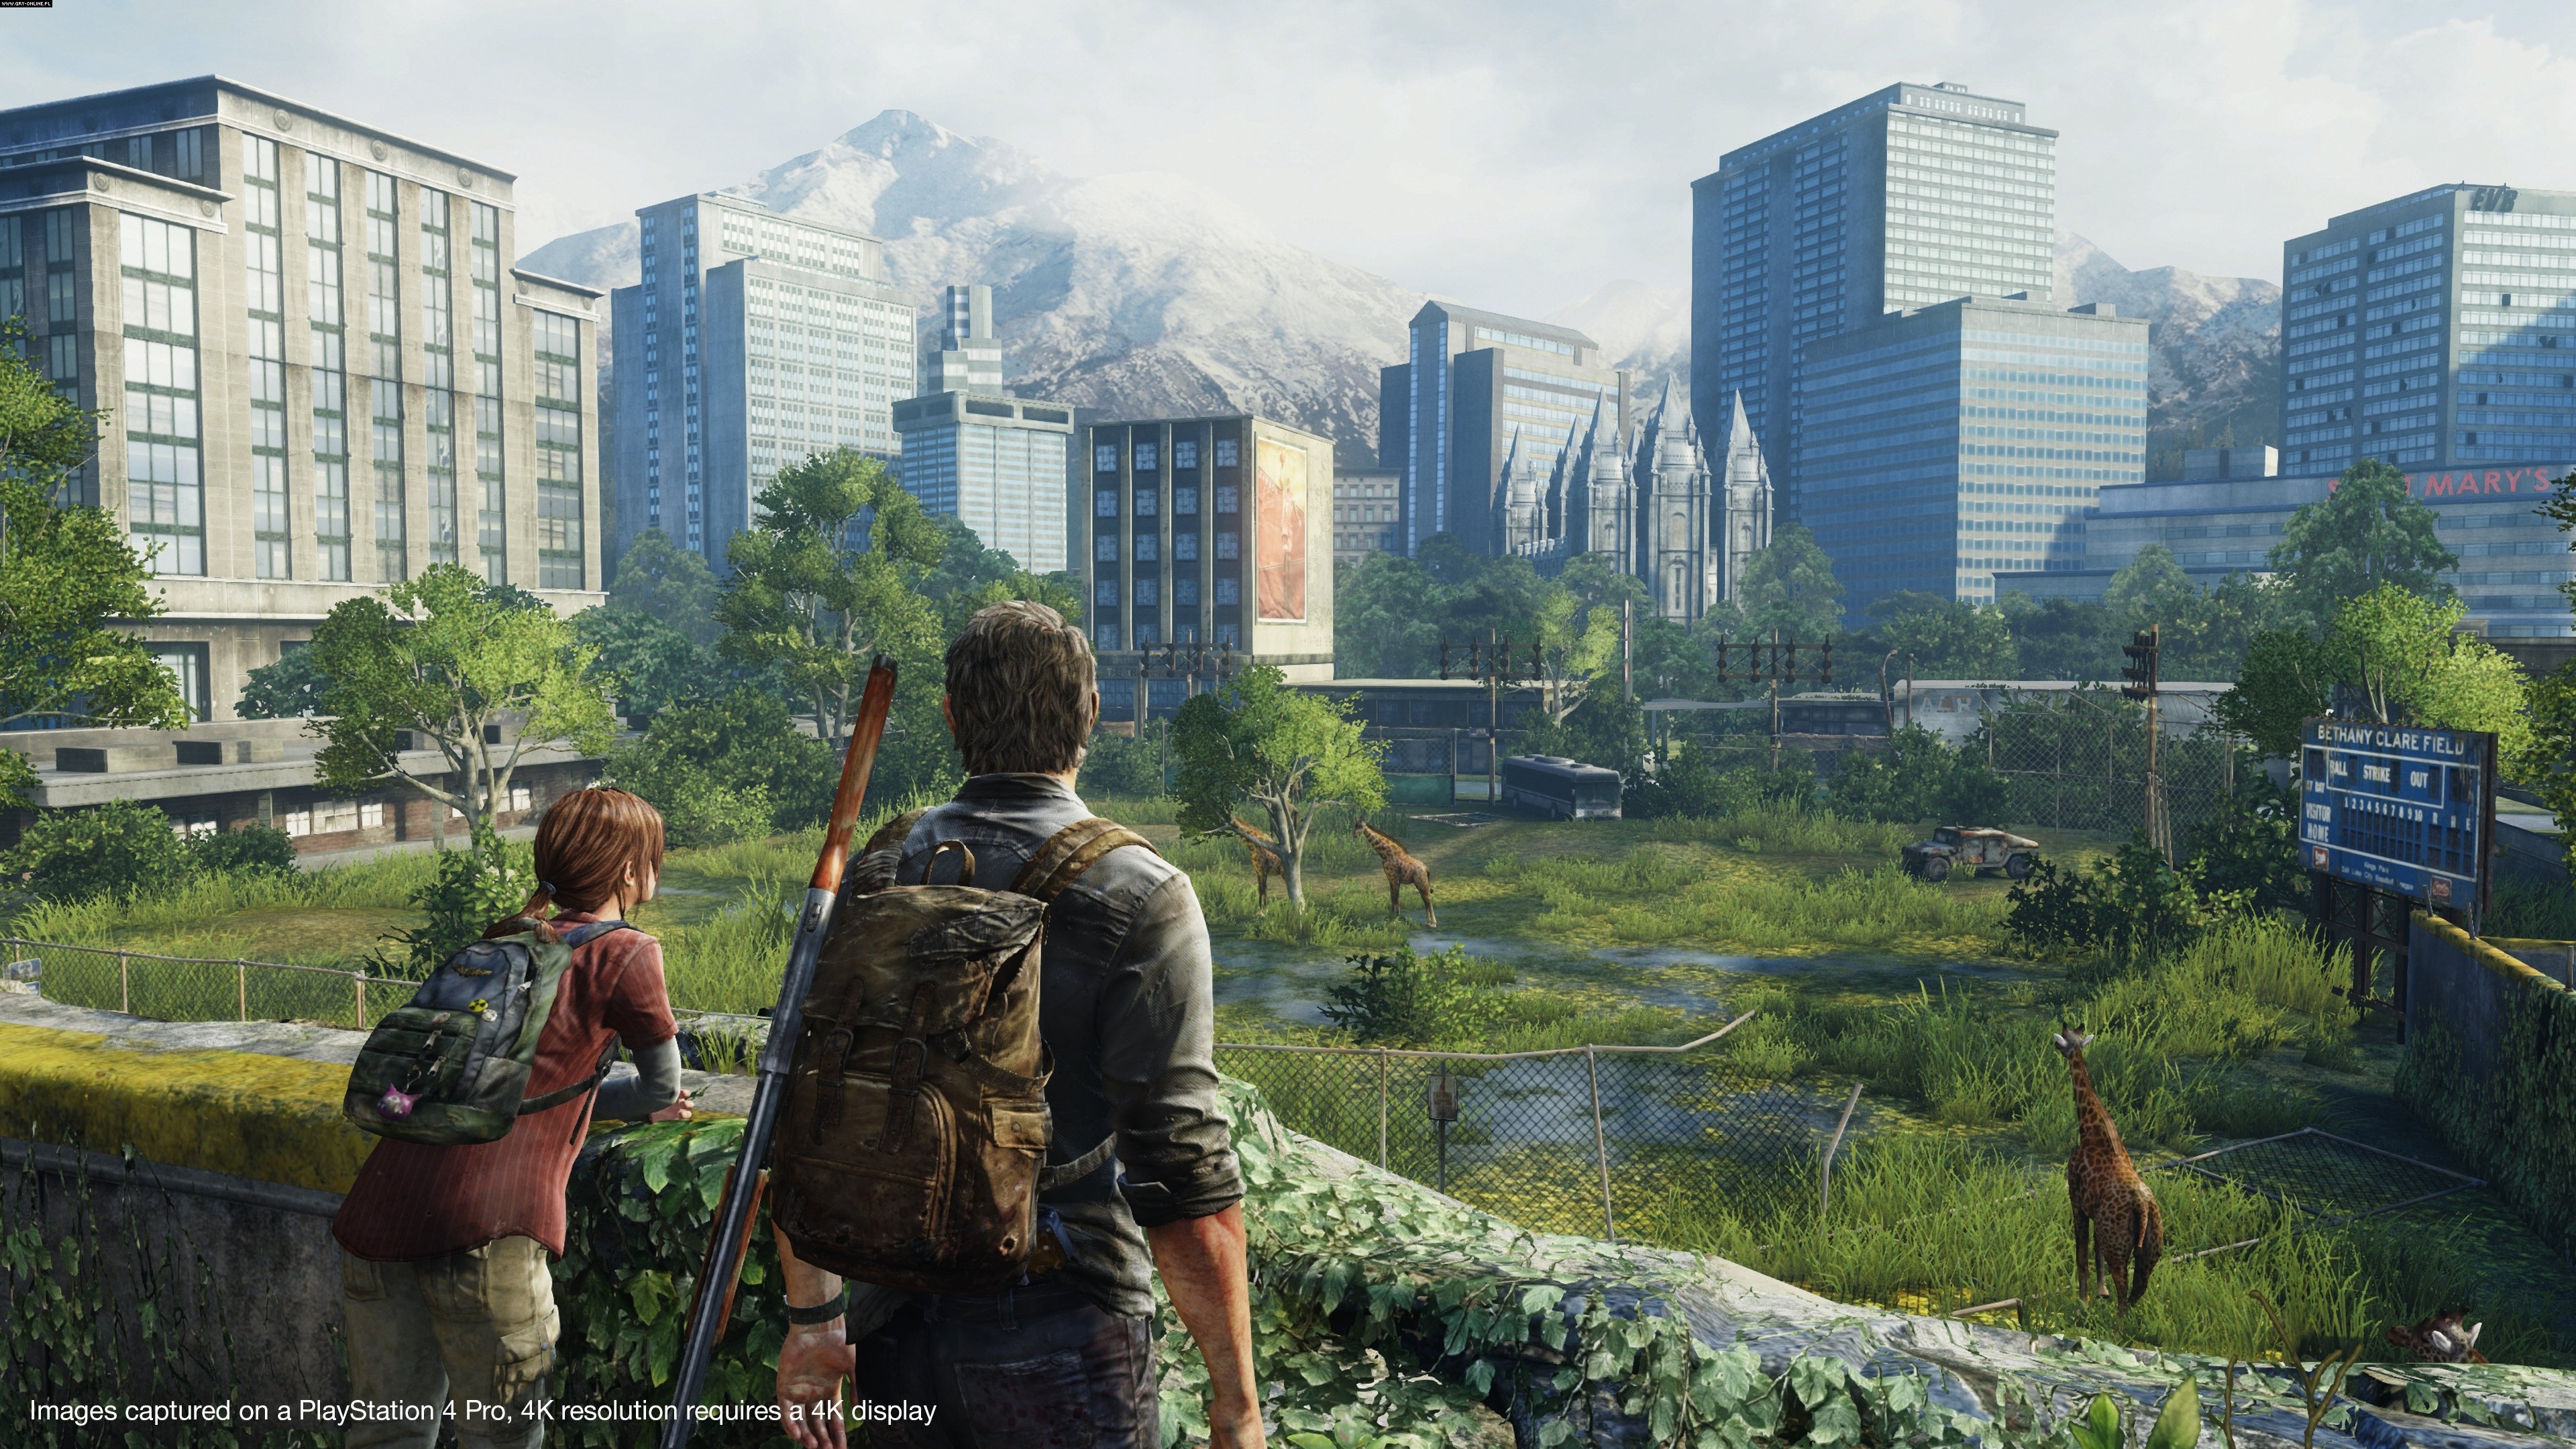 the last of us free download pc full game